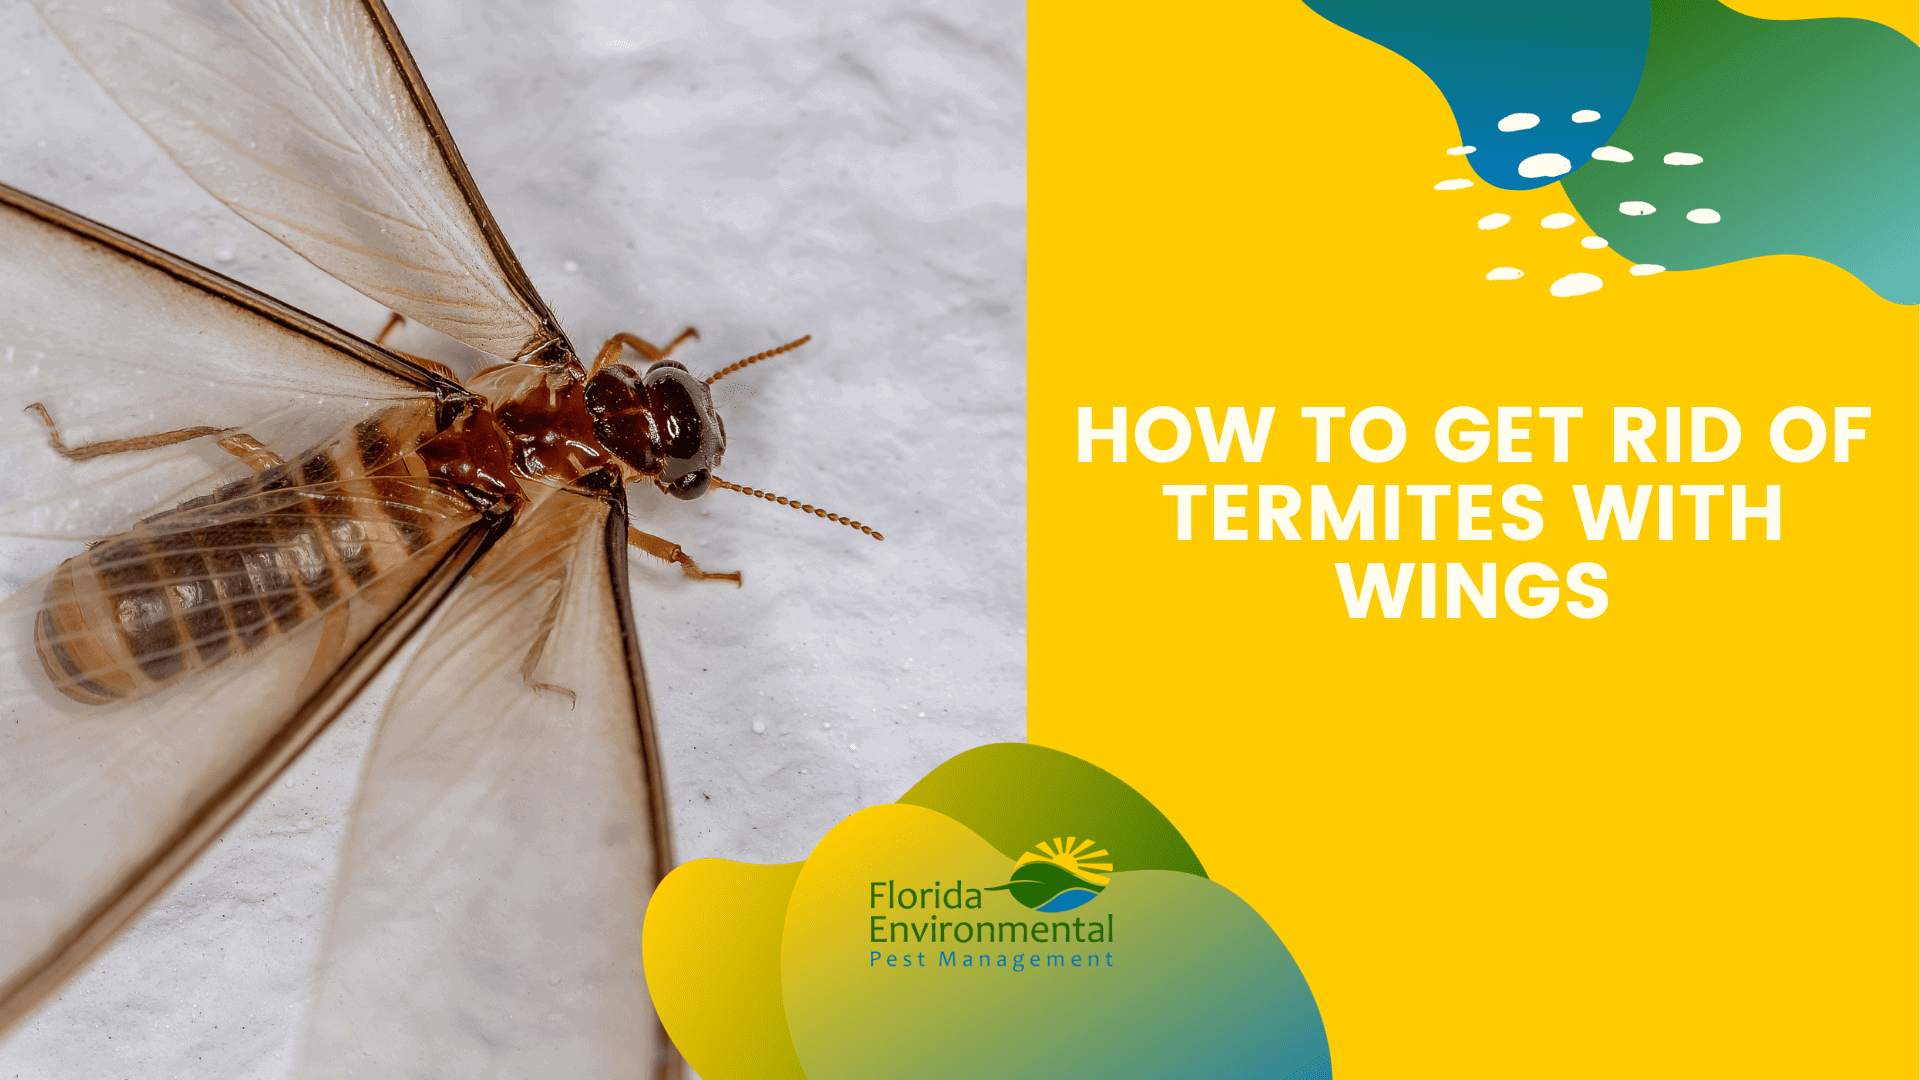 Get rid of termites with wings